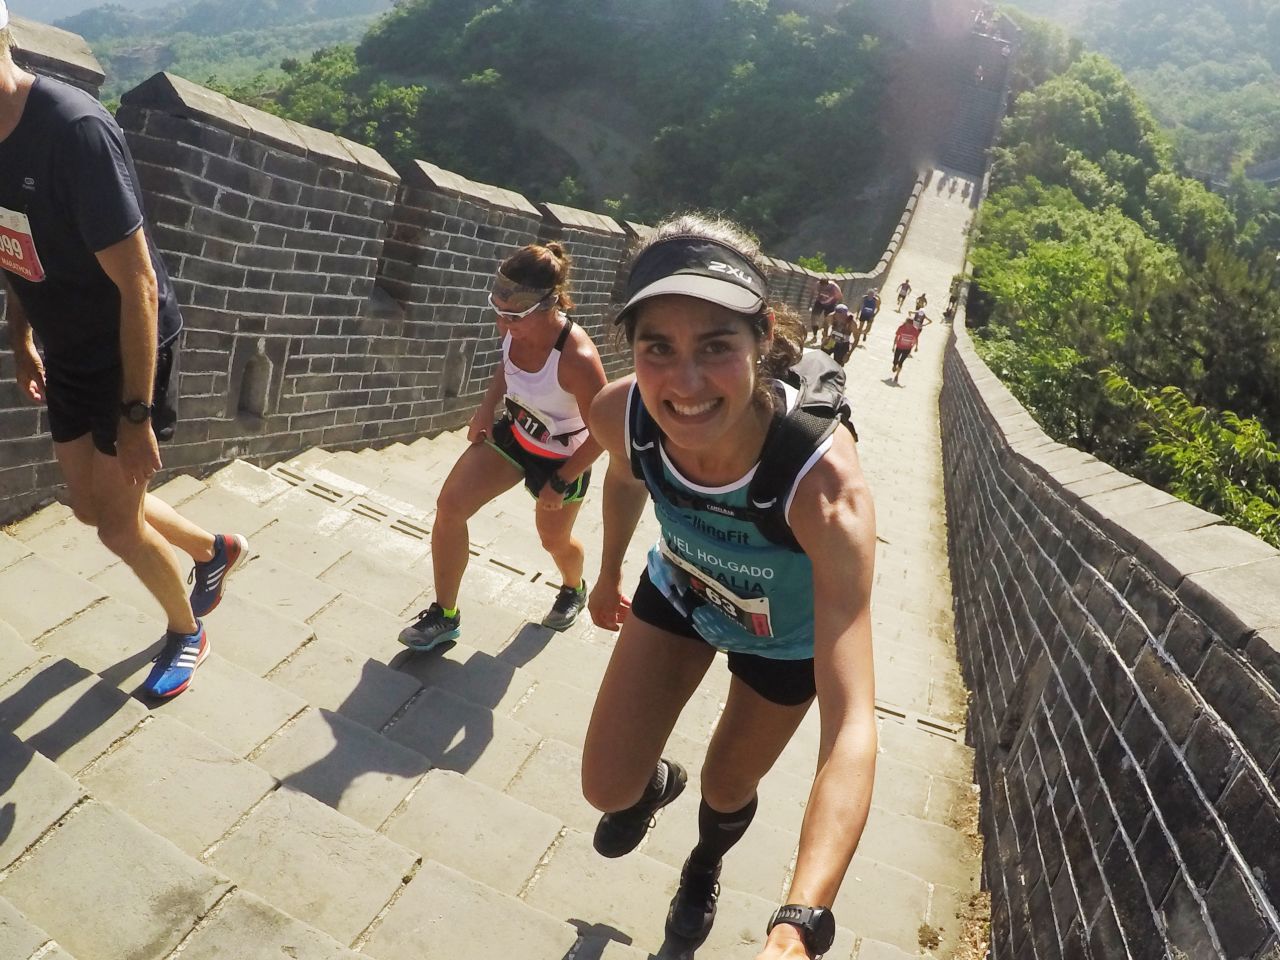 Australian fitness instructor Raquel Holgado competed in the 2017 Great Wall Marathon.